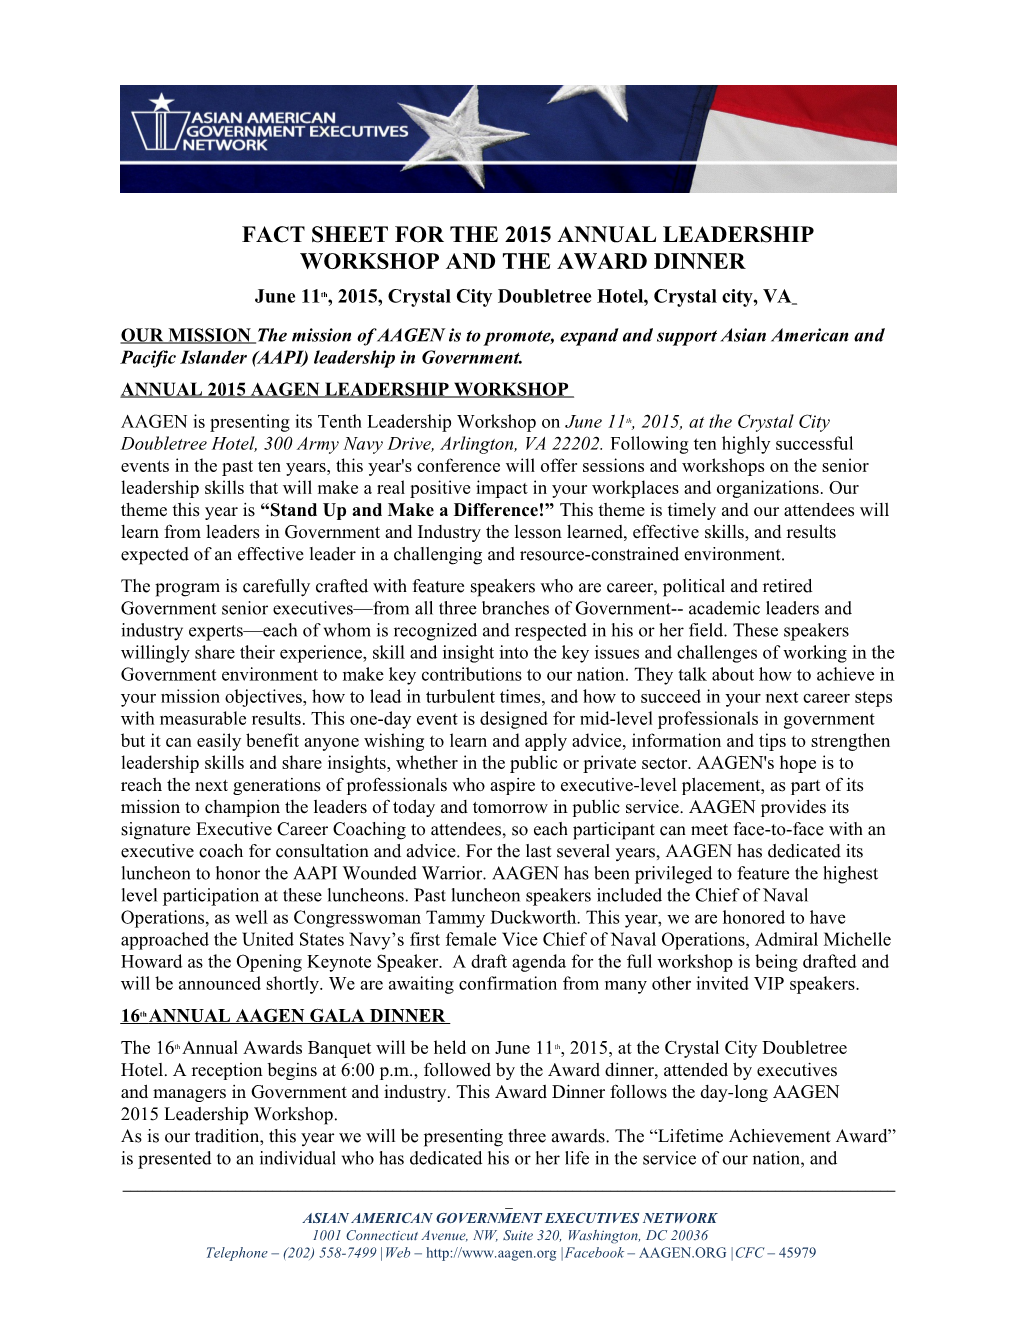 Fact Sheet for the 2015 Annual Leadership Workshop and the Award Dinner